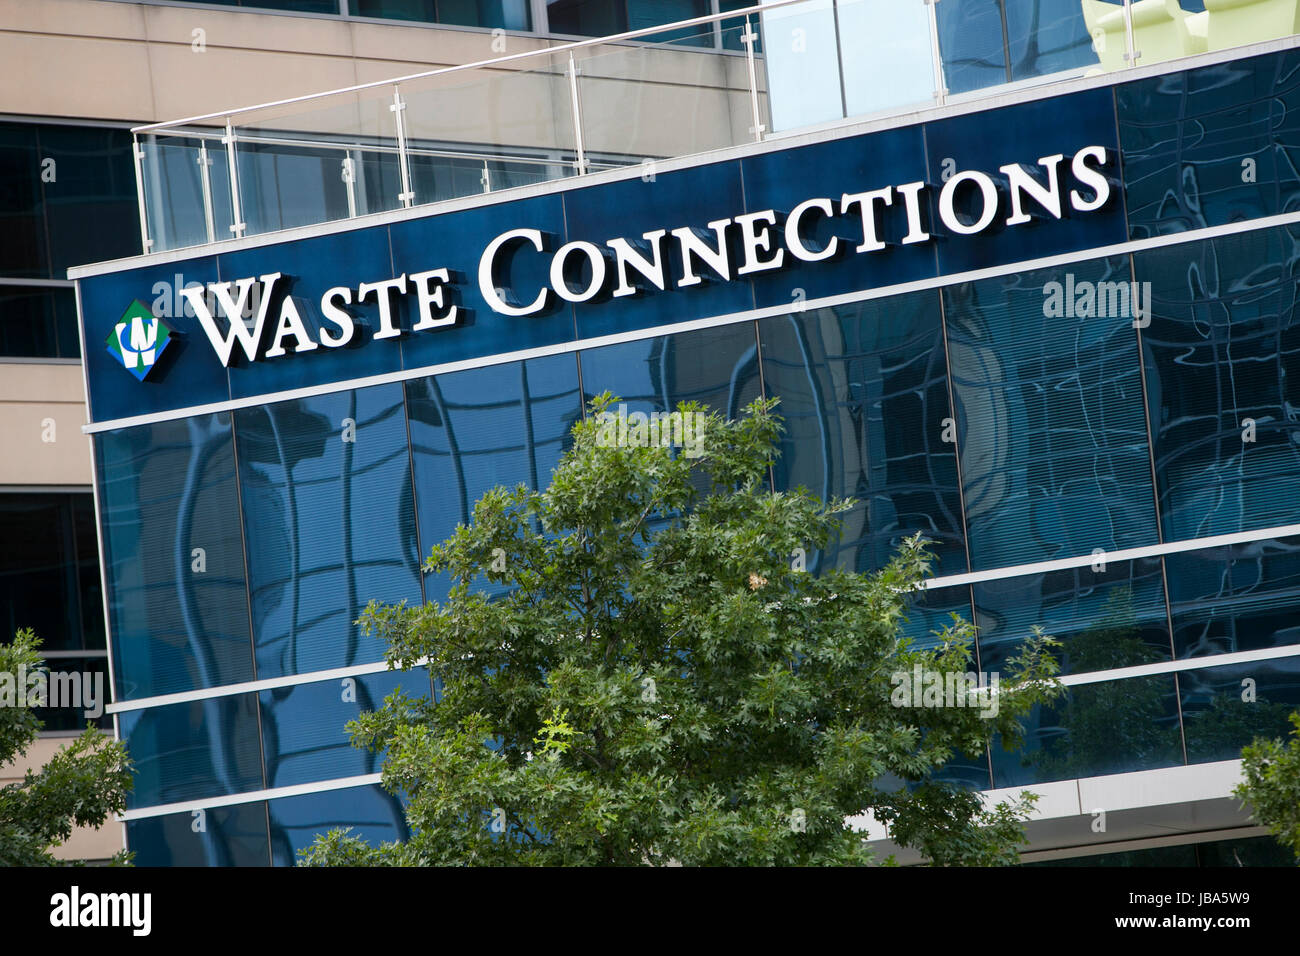 A logo sign outside of a facility occupied by Waste Connections, Inc., in The Woodlands, Texas, on May 28, 2017. Stock Photo